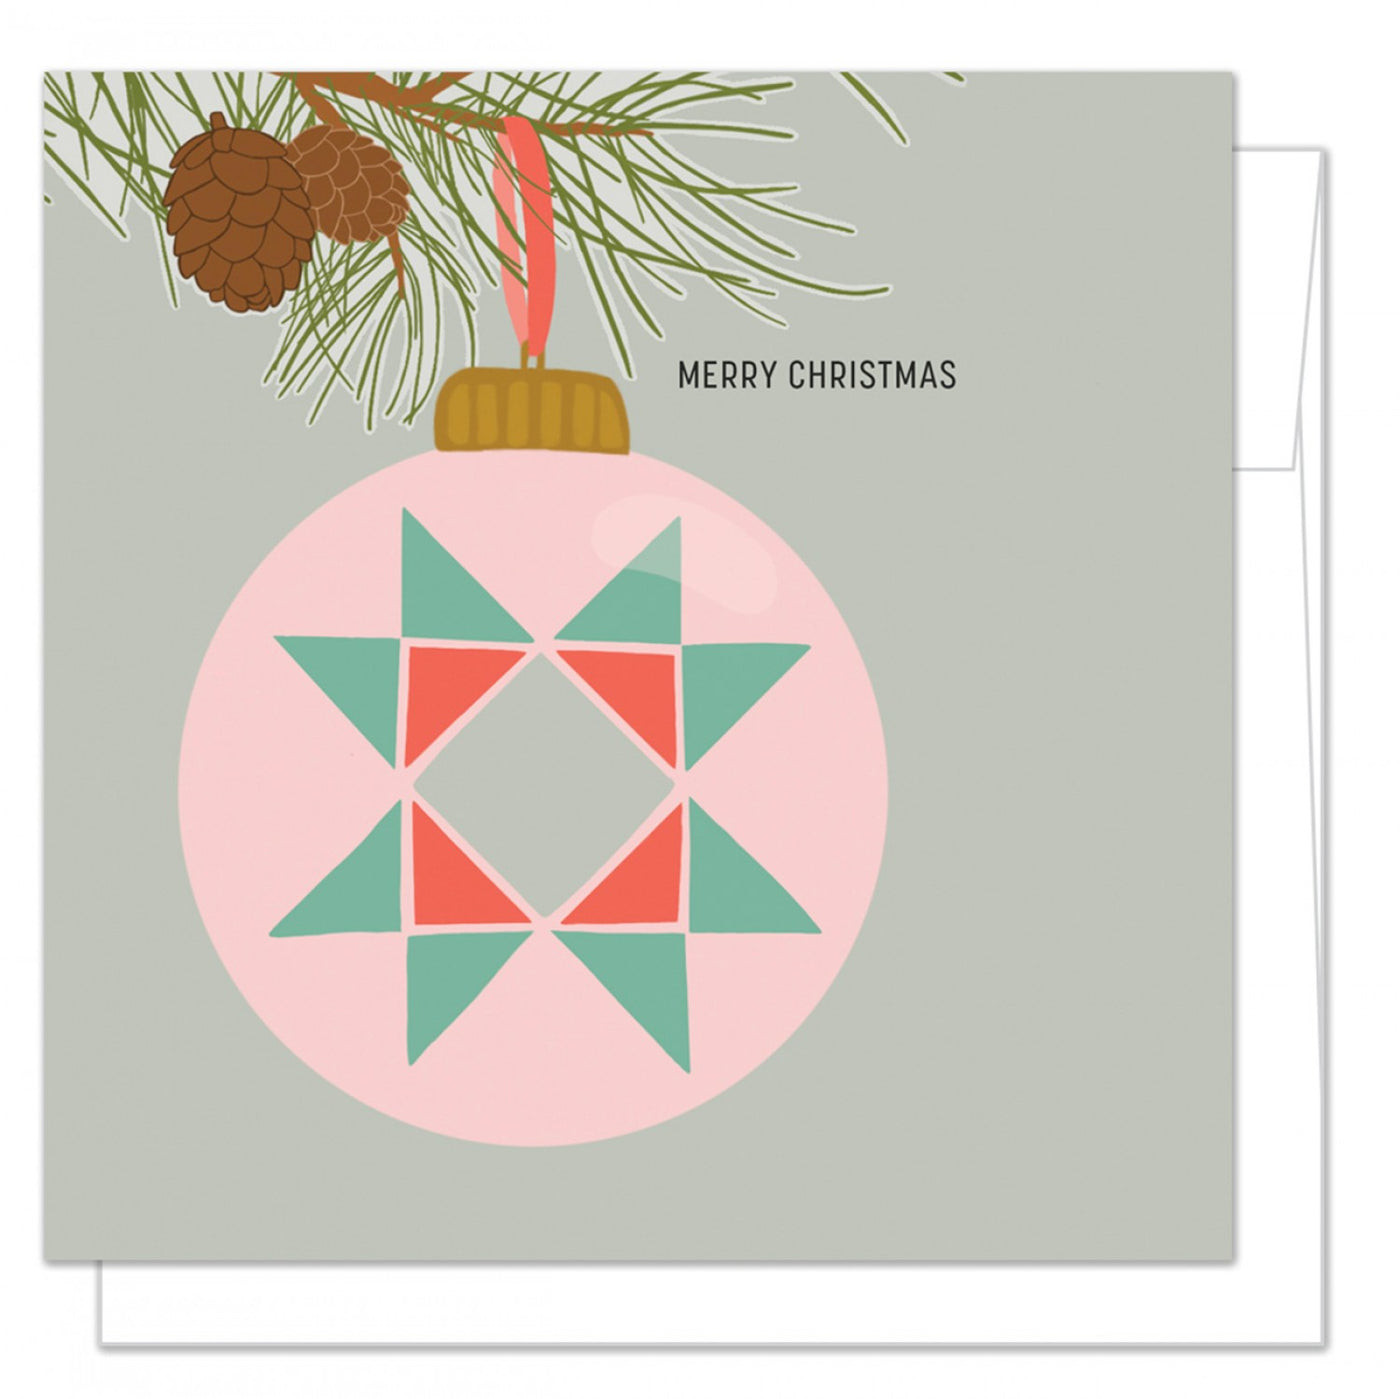 Merry Christmas Quilt Ornament Note Card